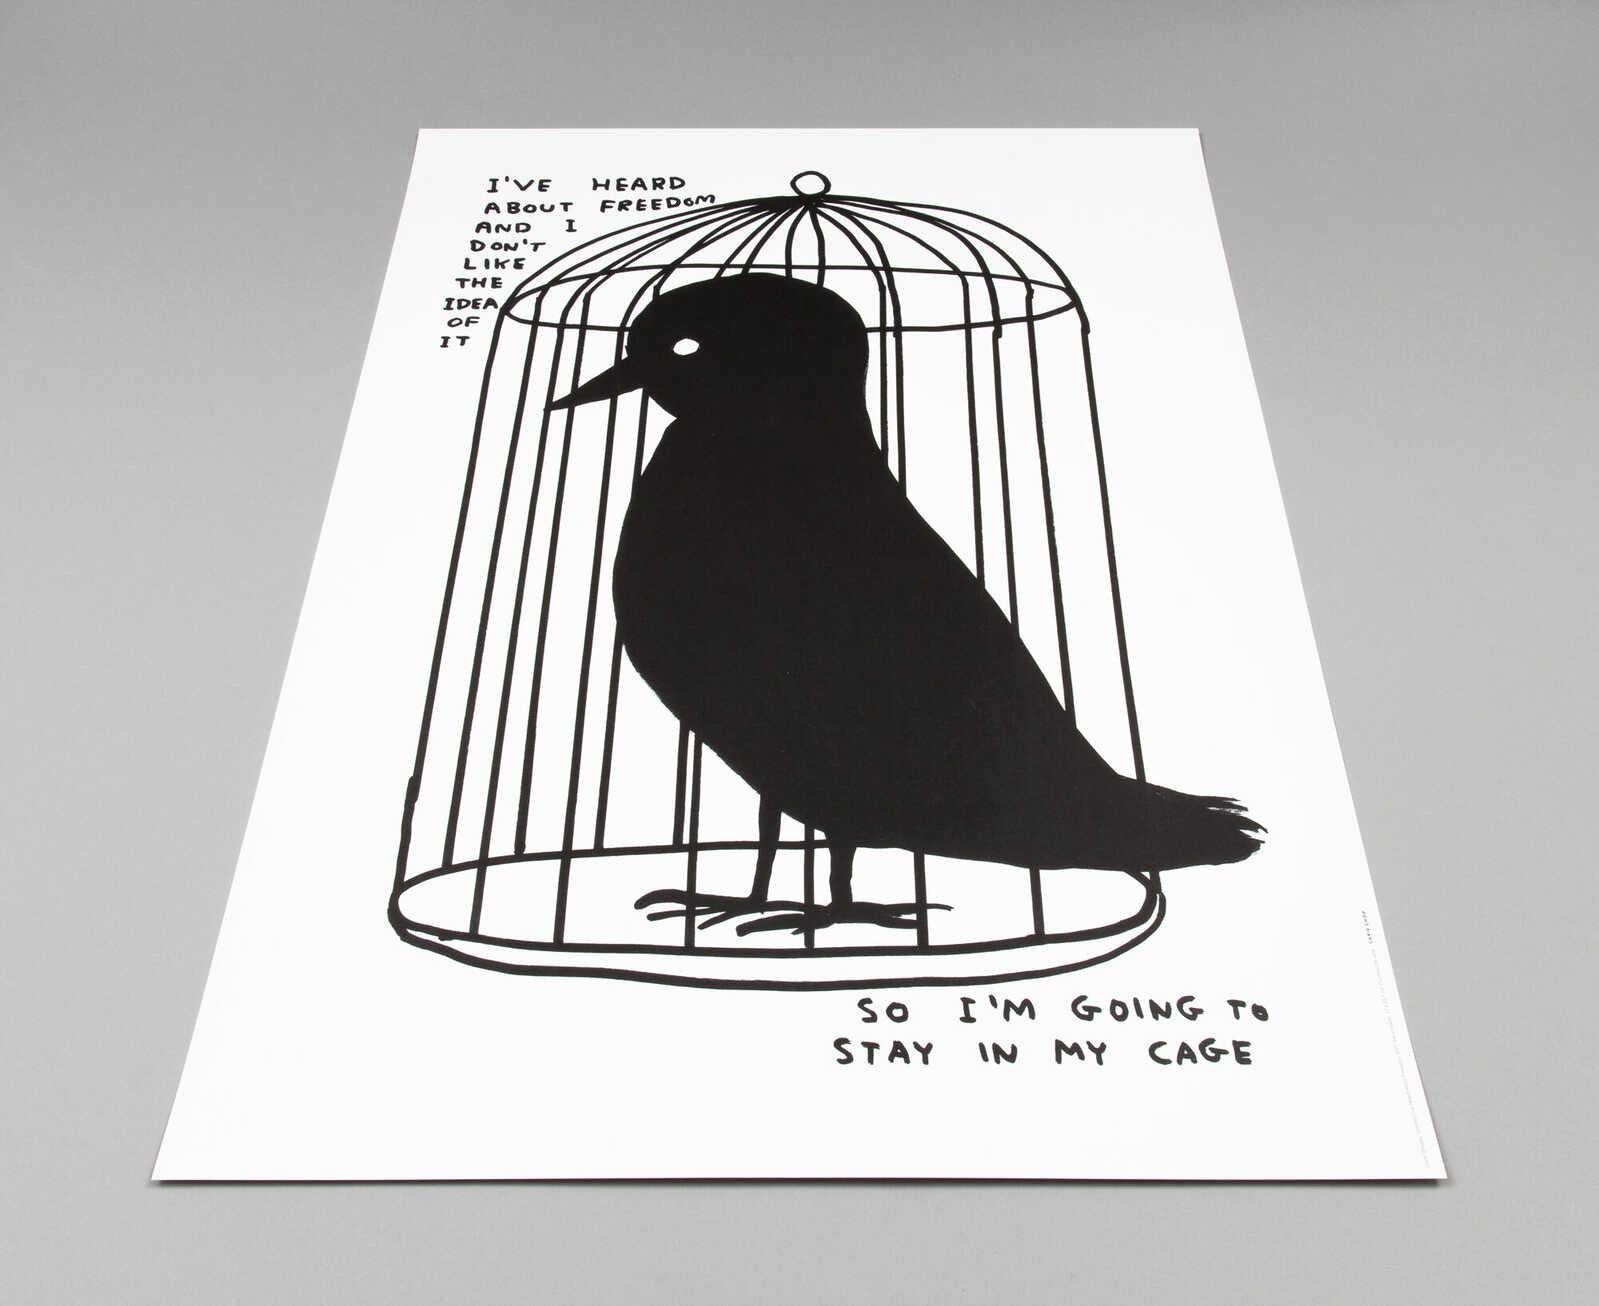 I've Heard About Freedom + Do Not Eat Him - Print by David Shrigley